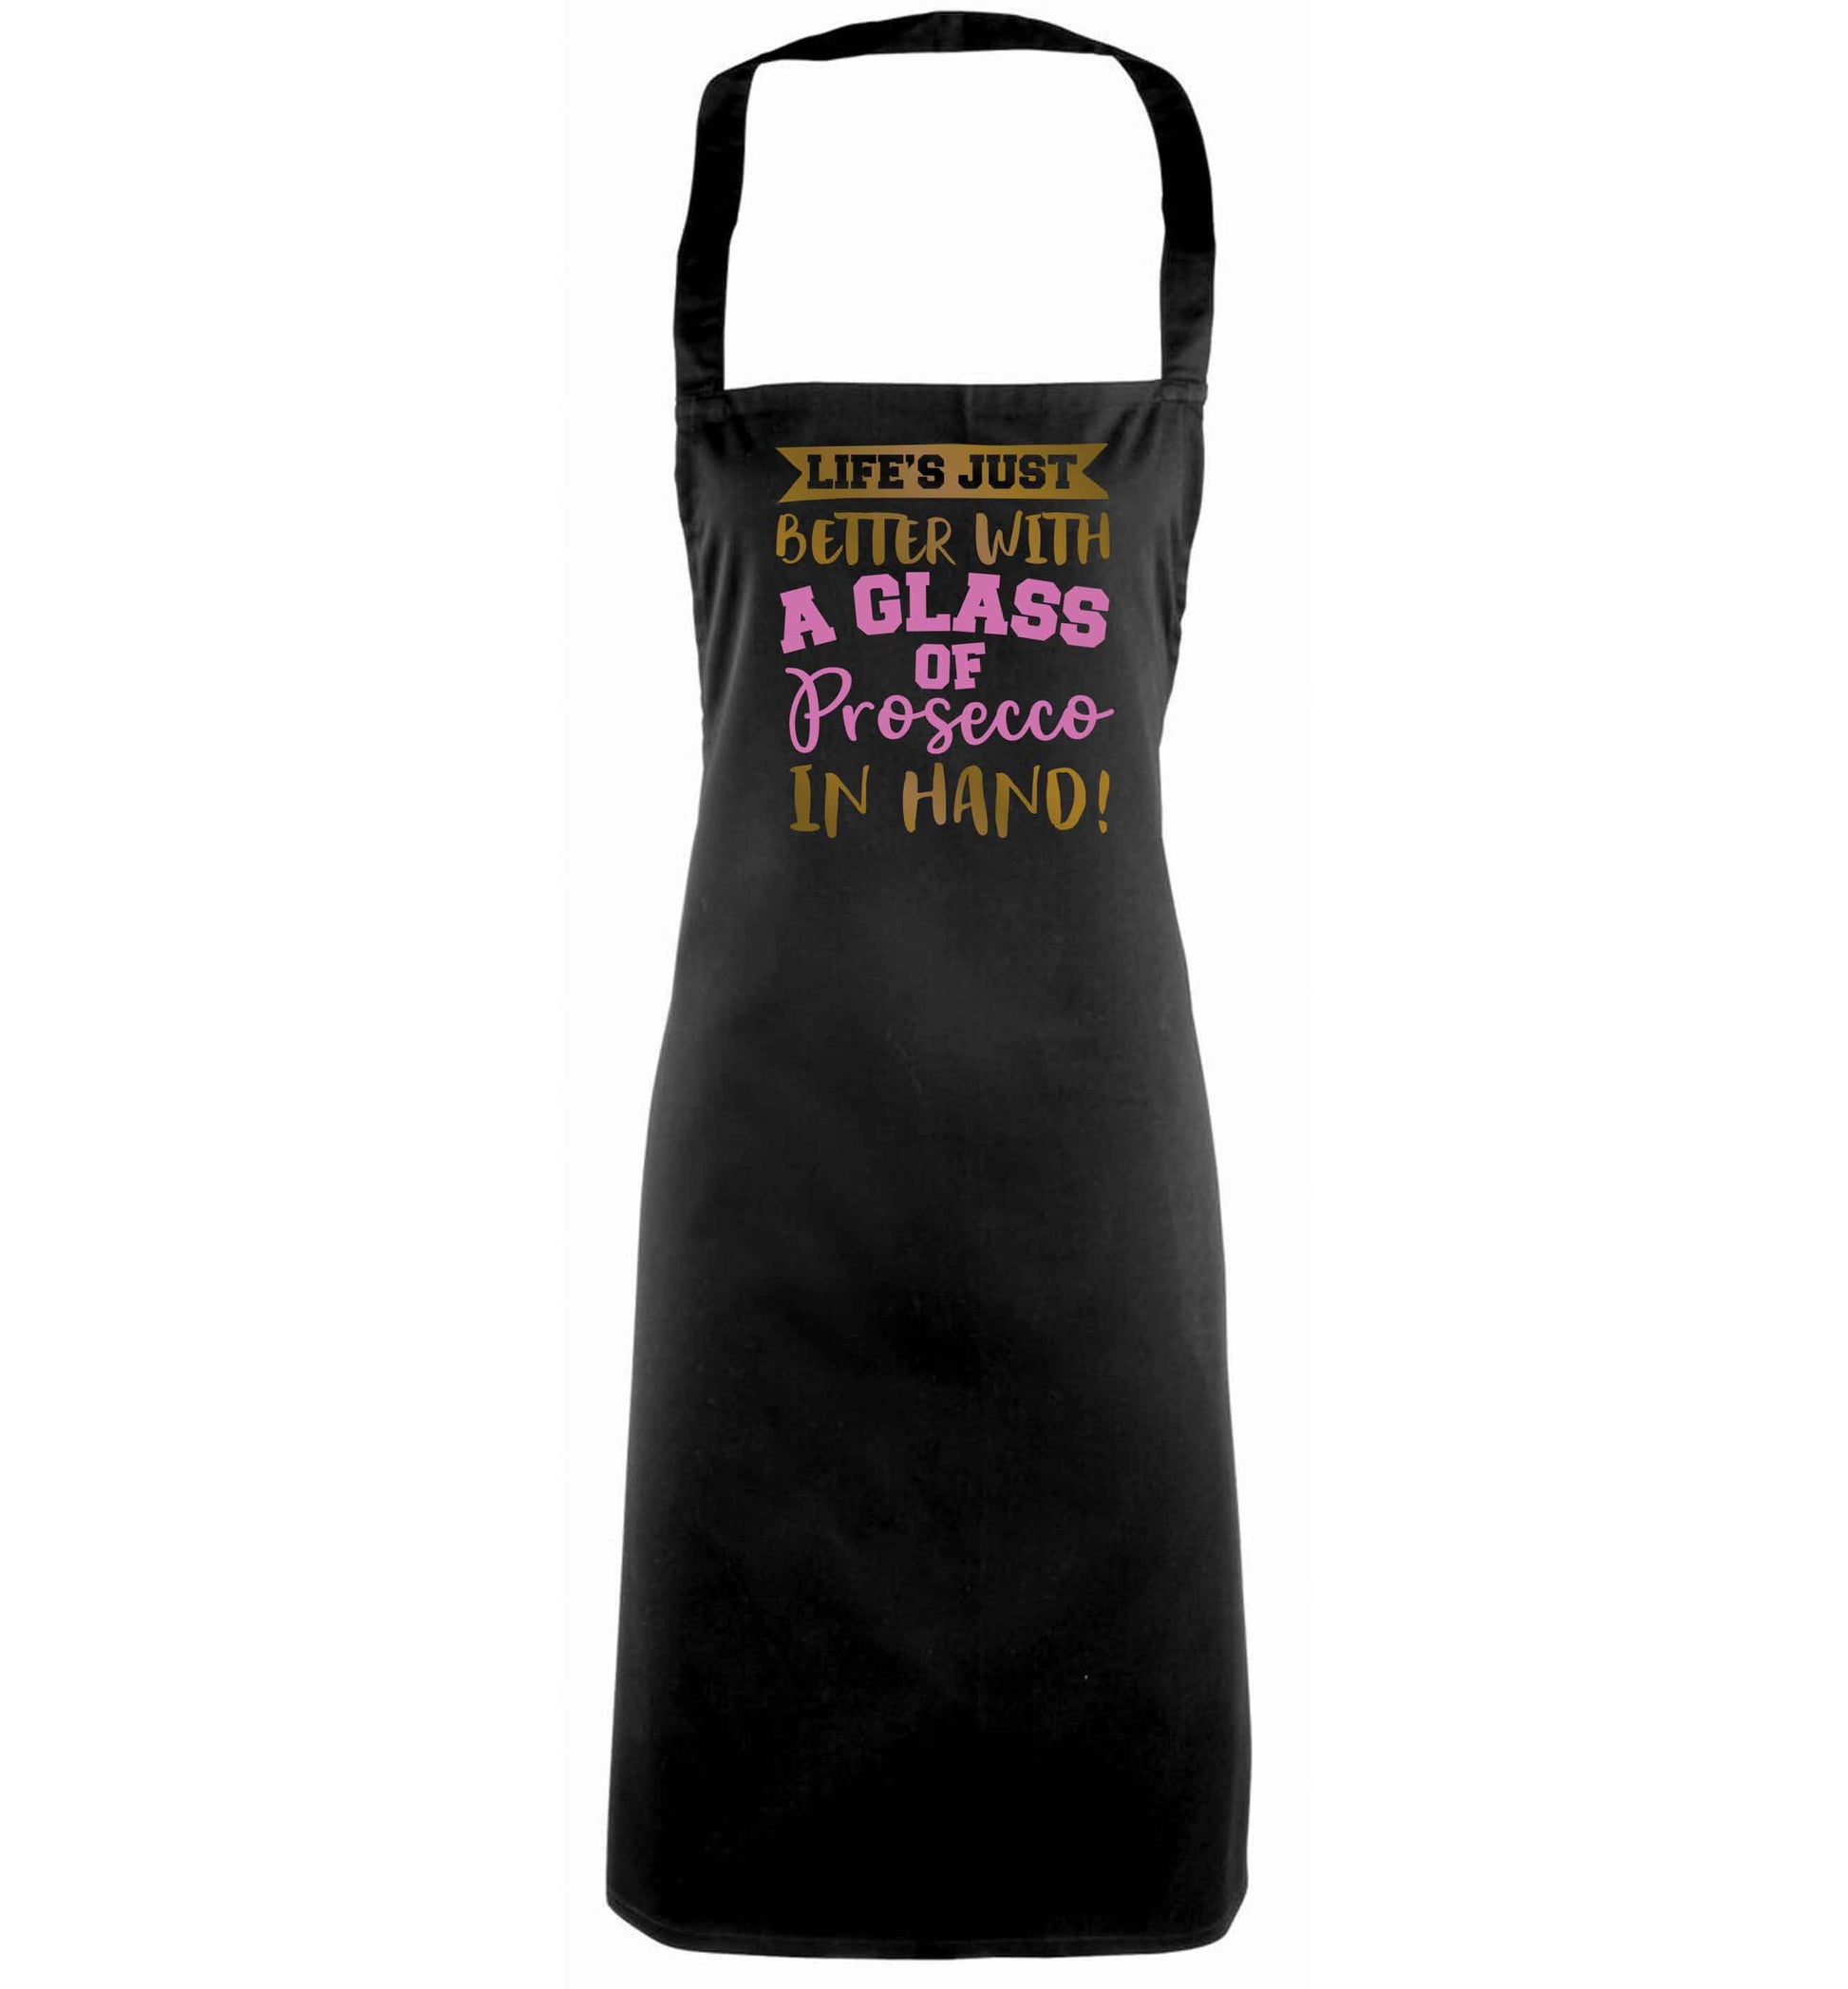 Life's just better with a glass of prosecco in hand black apron